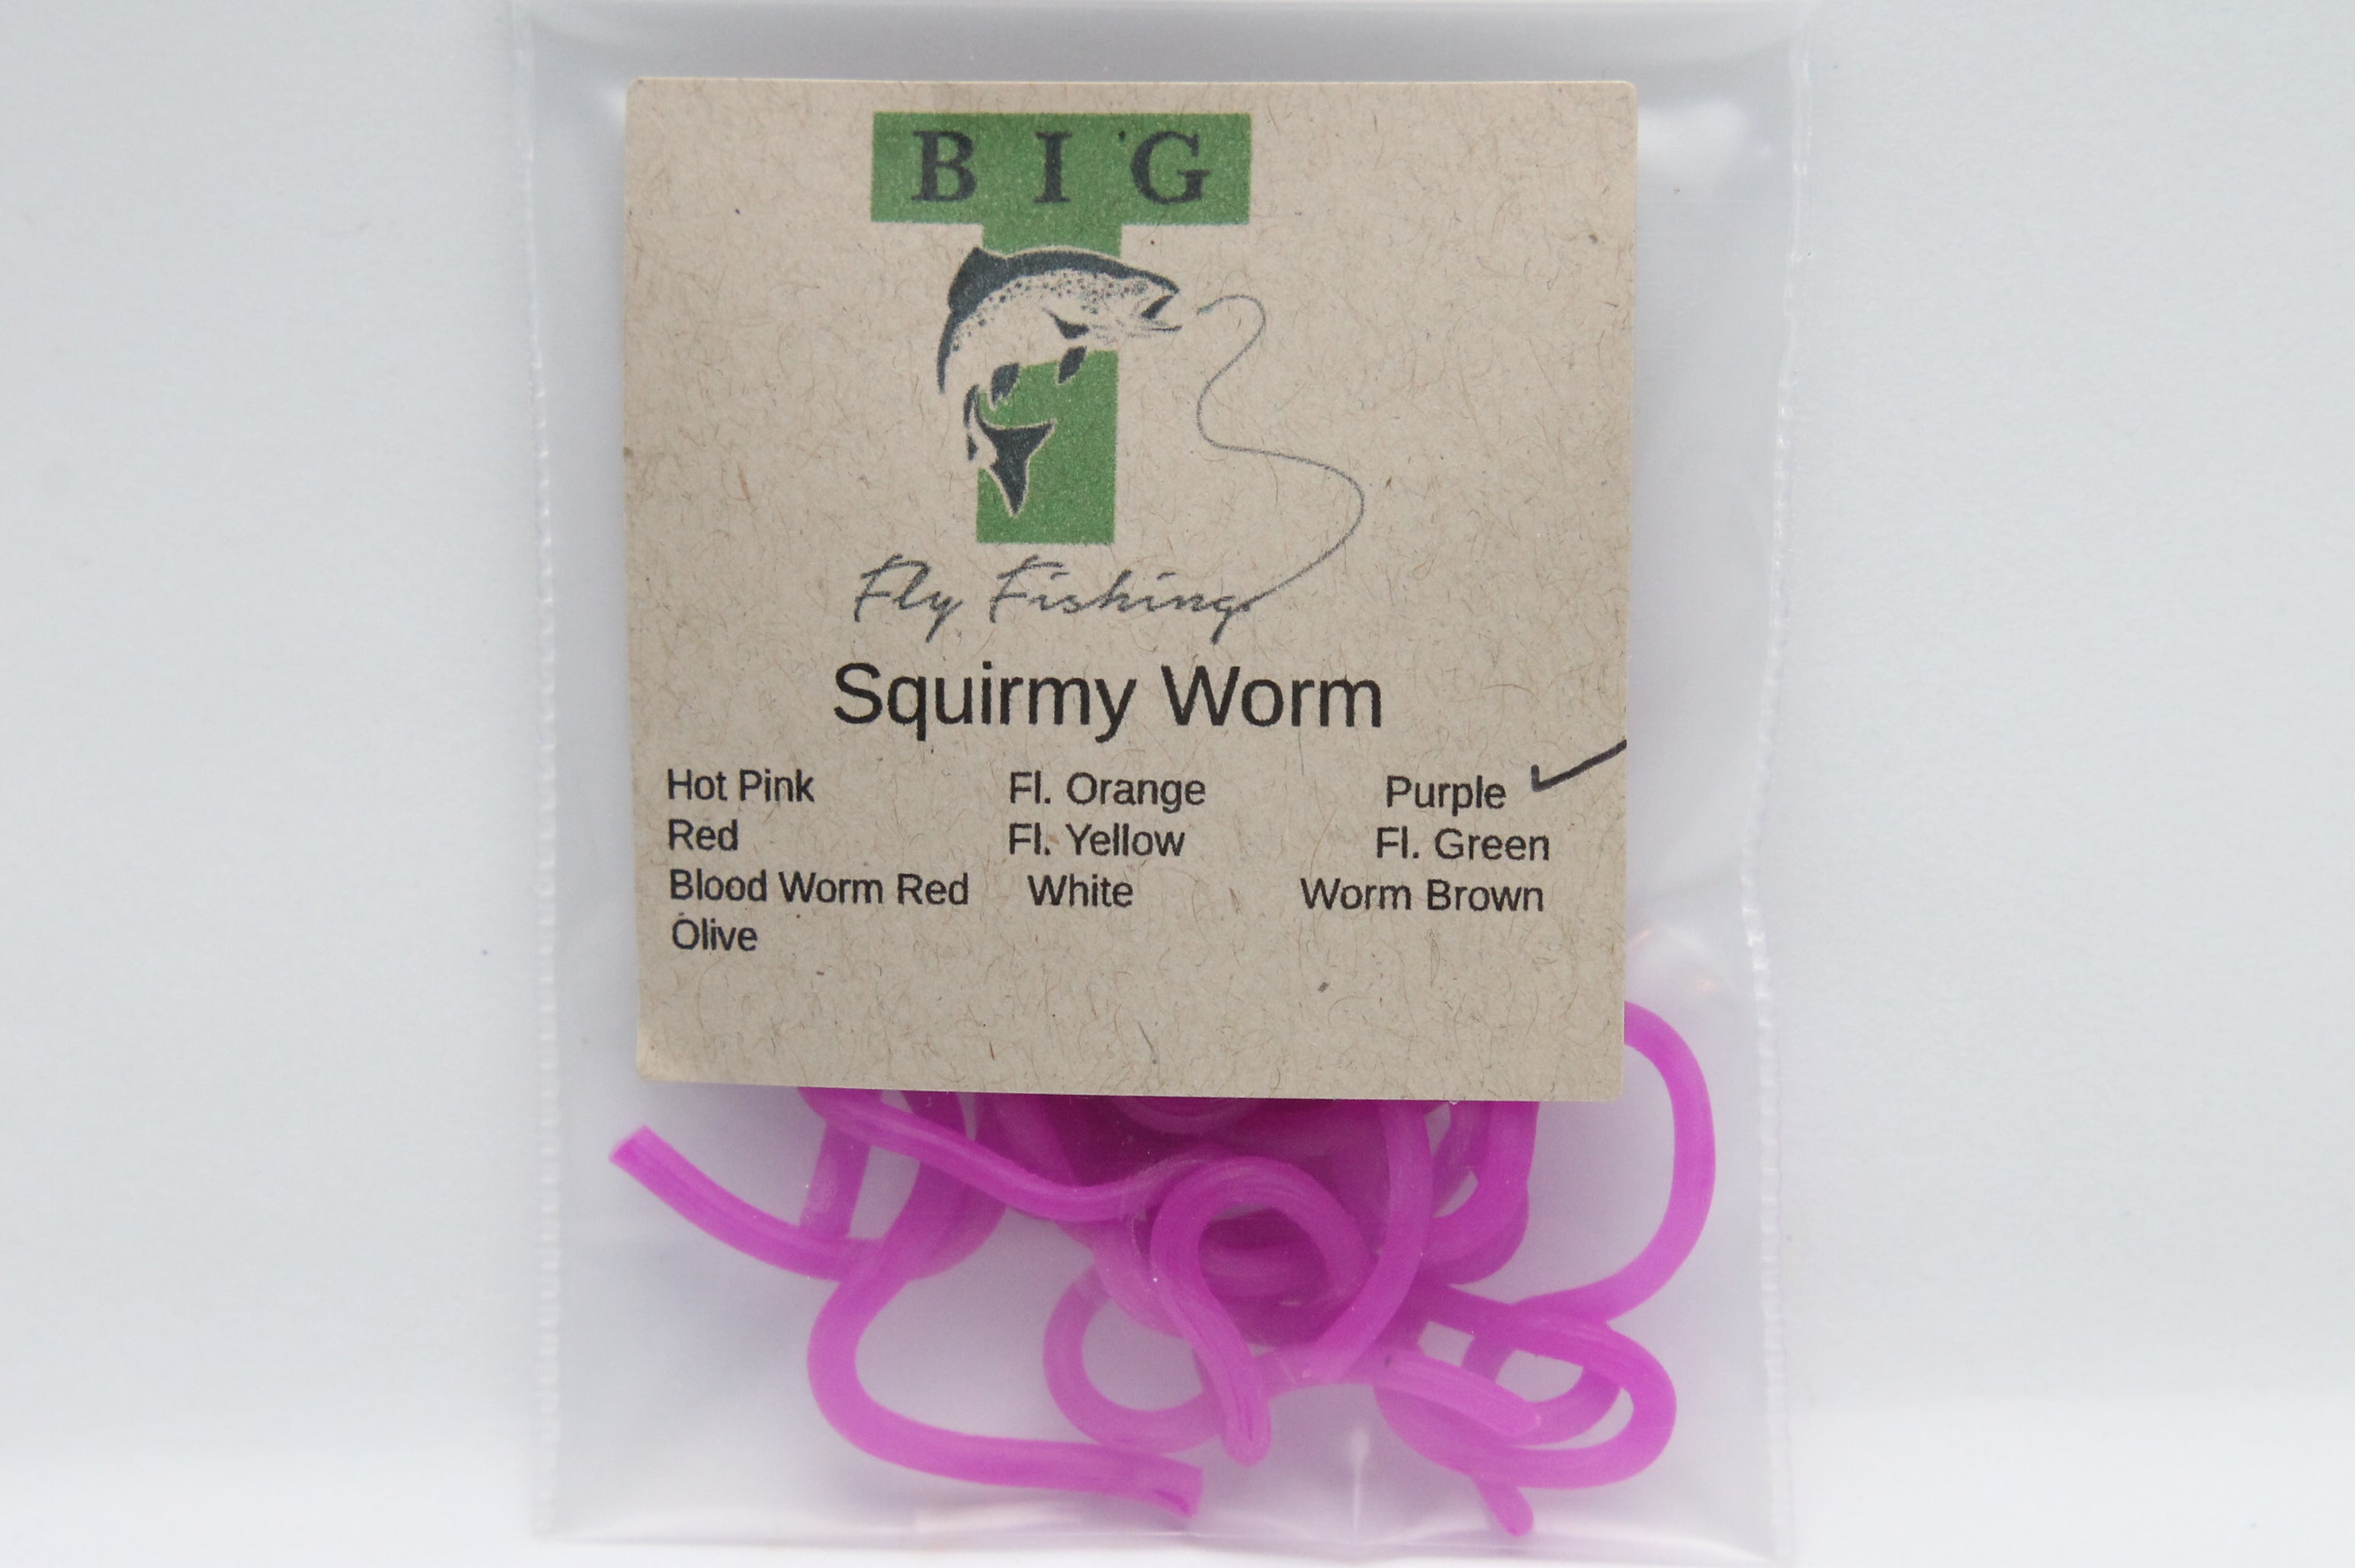 Big T Squirmy Worm Material